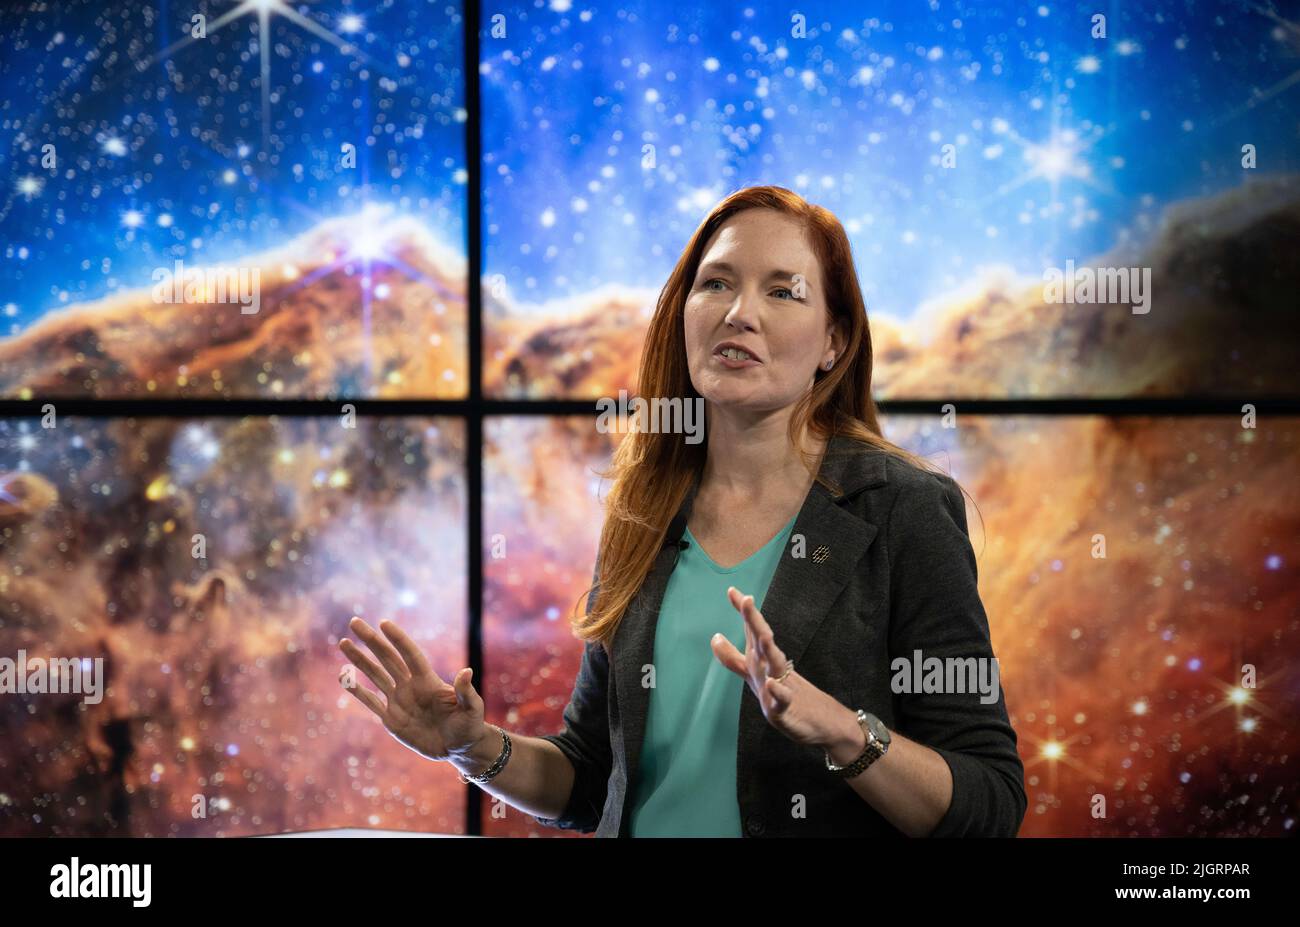 (220712) -- GREENBELT (U.S.), July 12, 2022 (Xinhua) -- NASA James Webb Space Telescope Deputy Project Scientist for Communications Amber Straughn speaks about the infrared image of the star-forming region called NGC 3324 in the Carina Nebula as it is shown on a screen during a broadcast releasing the telescope's first full-color images at NASA's Goddard Space Flight Center in Greenbelt, Maryland, the Untied States, on July 12, 2022. NASA released James Webb Space Telescope's first full-color images of the universe and their spectroscopic data on Tuesday, revealing the unprecedented and detail Stock Photo